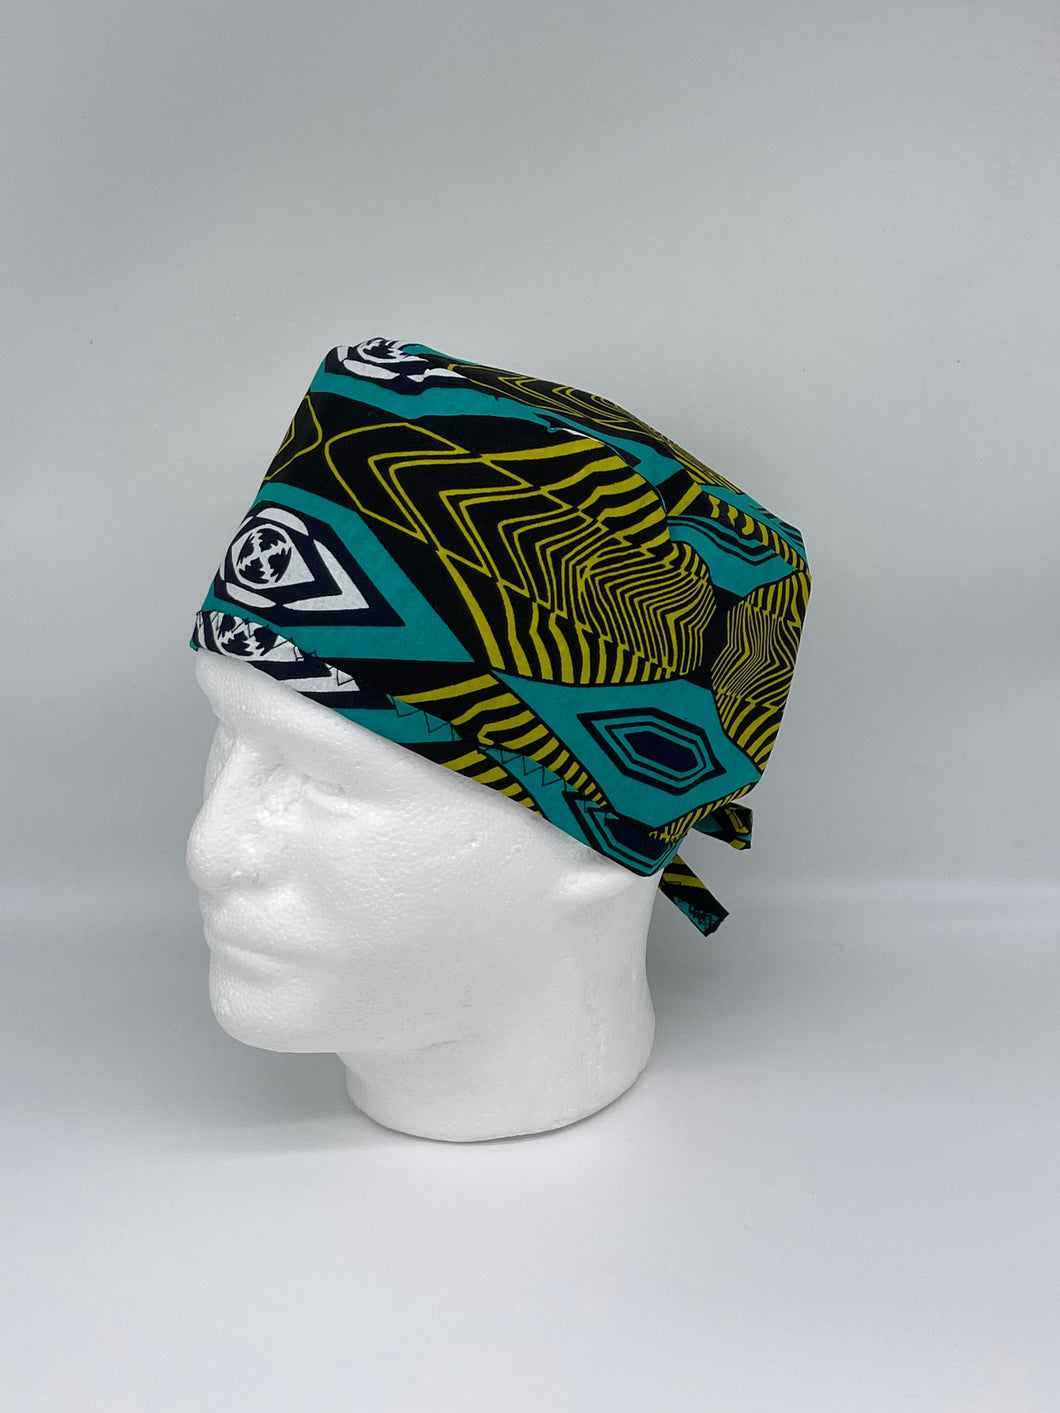 Niceroy unisex surgical pixie SCRUB HAT Cap, nursing caps made with cotton fabric and satin lining option African print men scrub cap